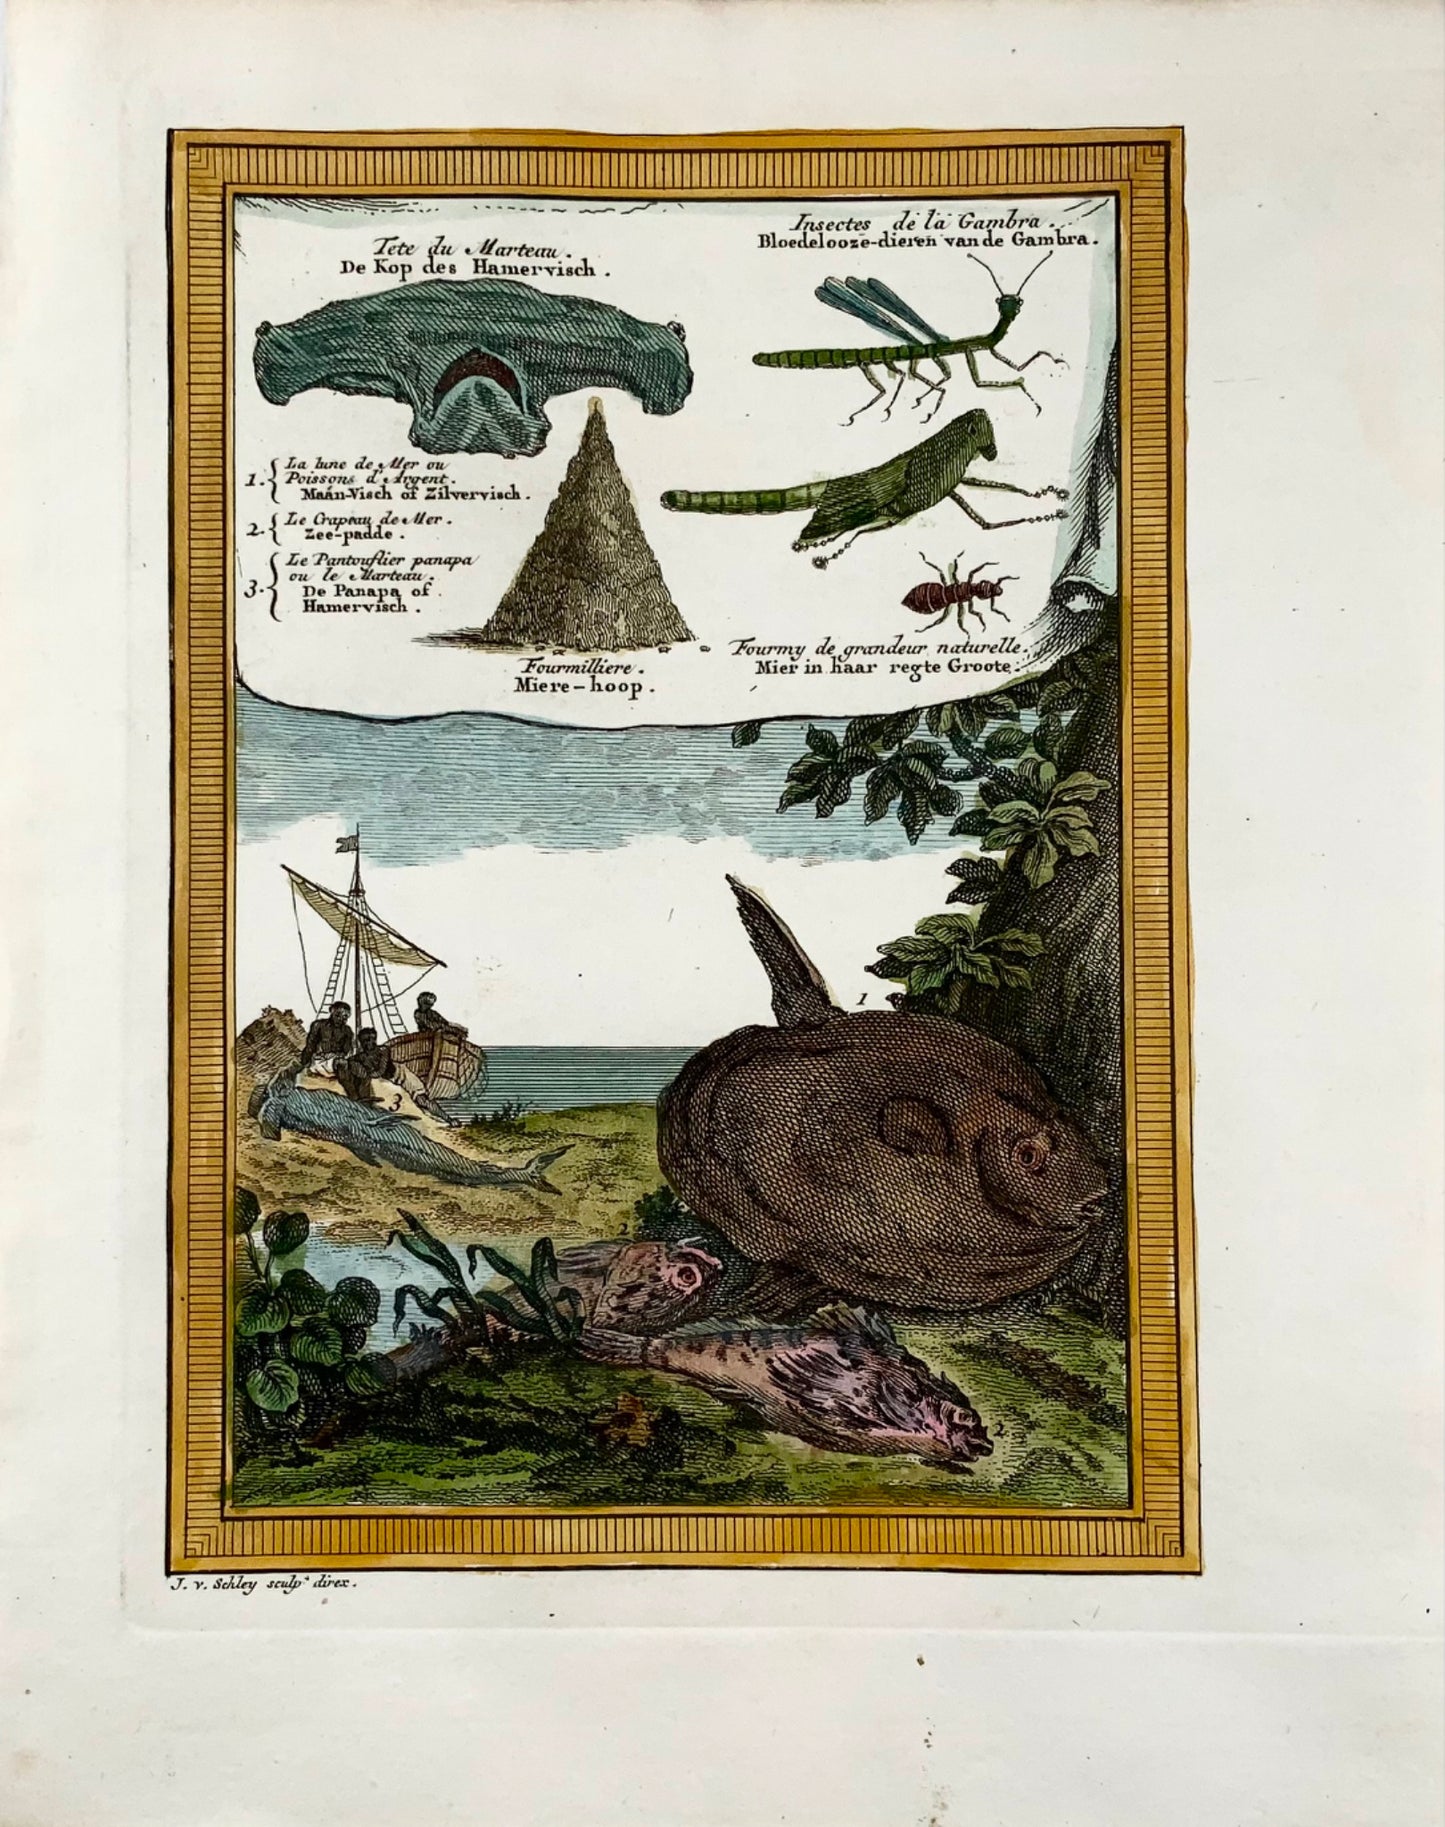 1750 West Africa, animals, sunfish, hammerhead shark, insects